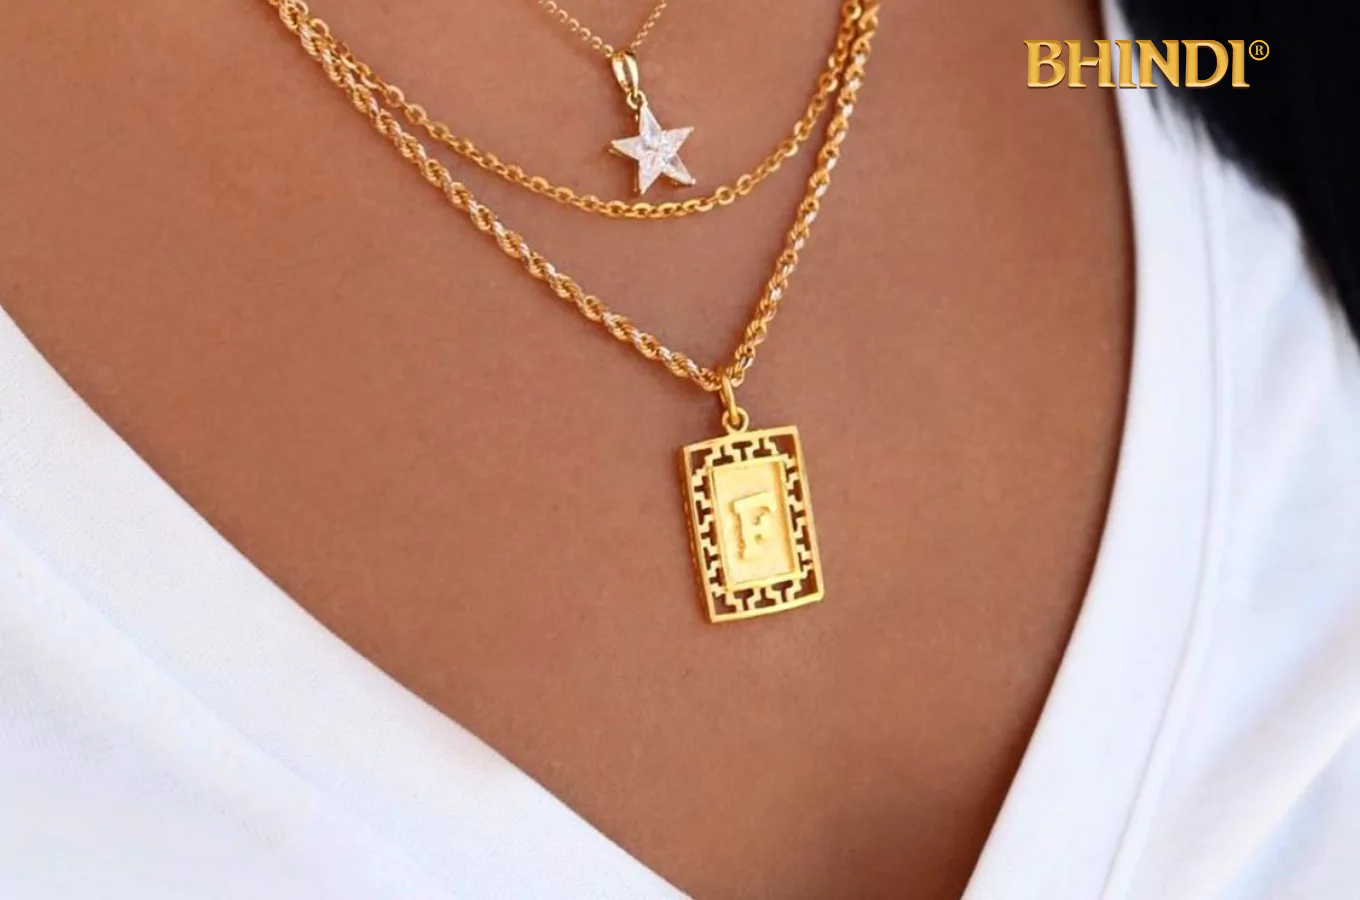 Express Your Unique Style with Personalized Initial Jewelry